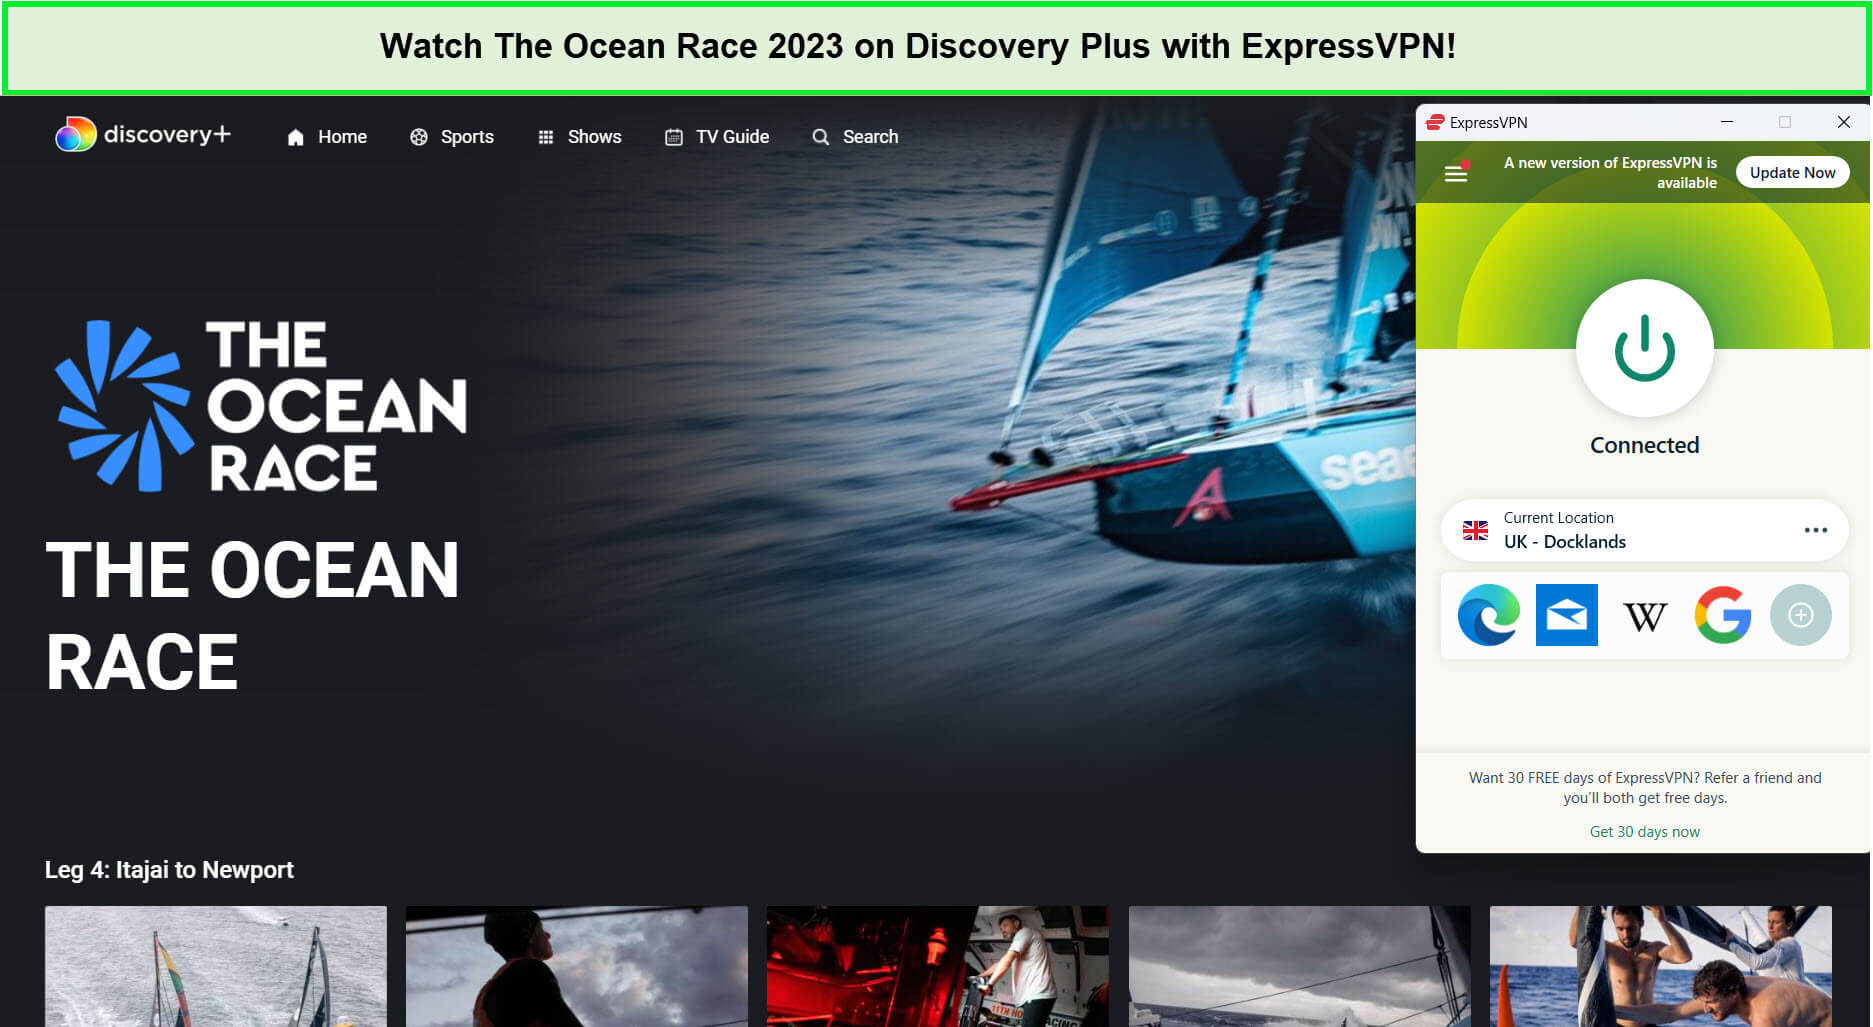 expressvpn-unblocks-the-ocean-race-on-discovery-plus-in-new-zealand